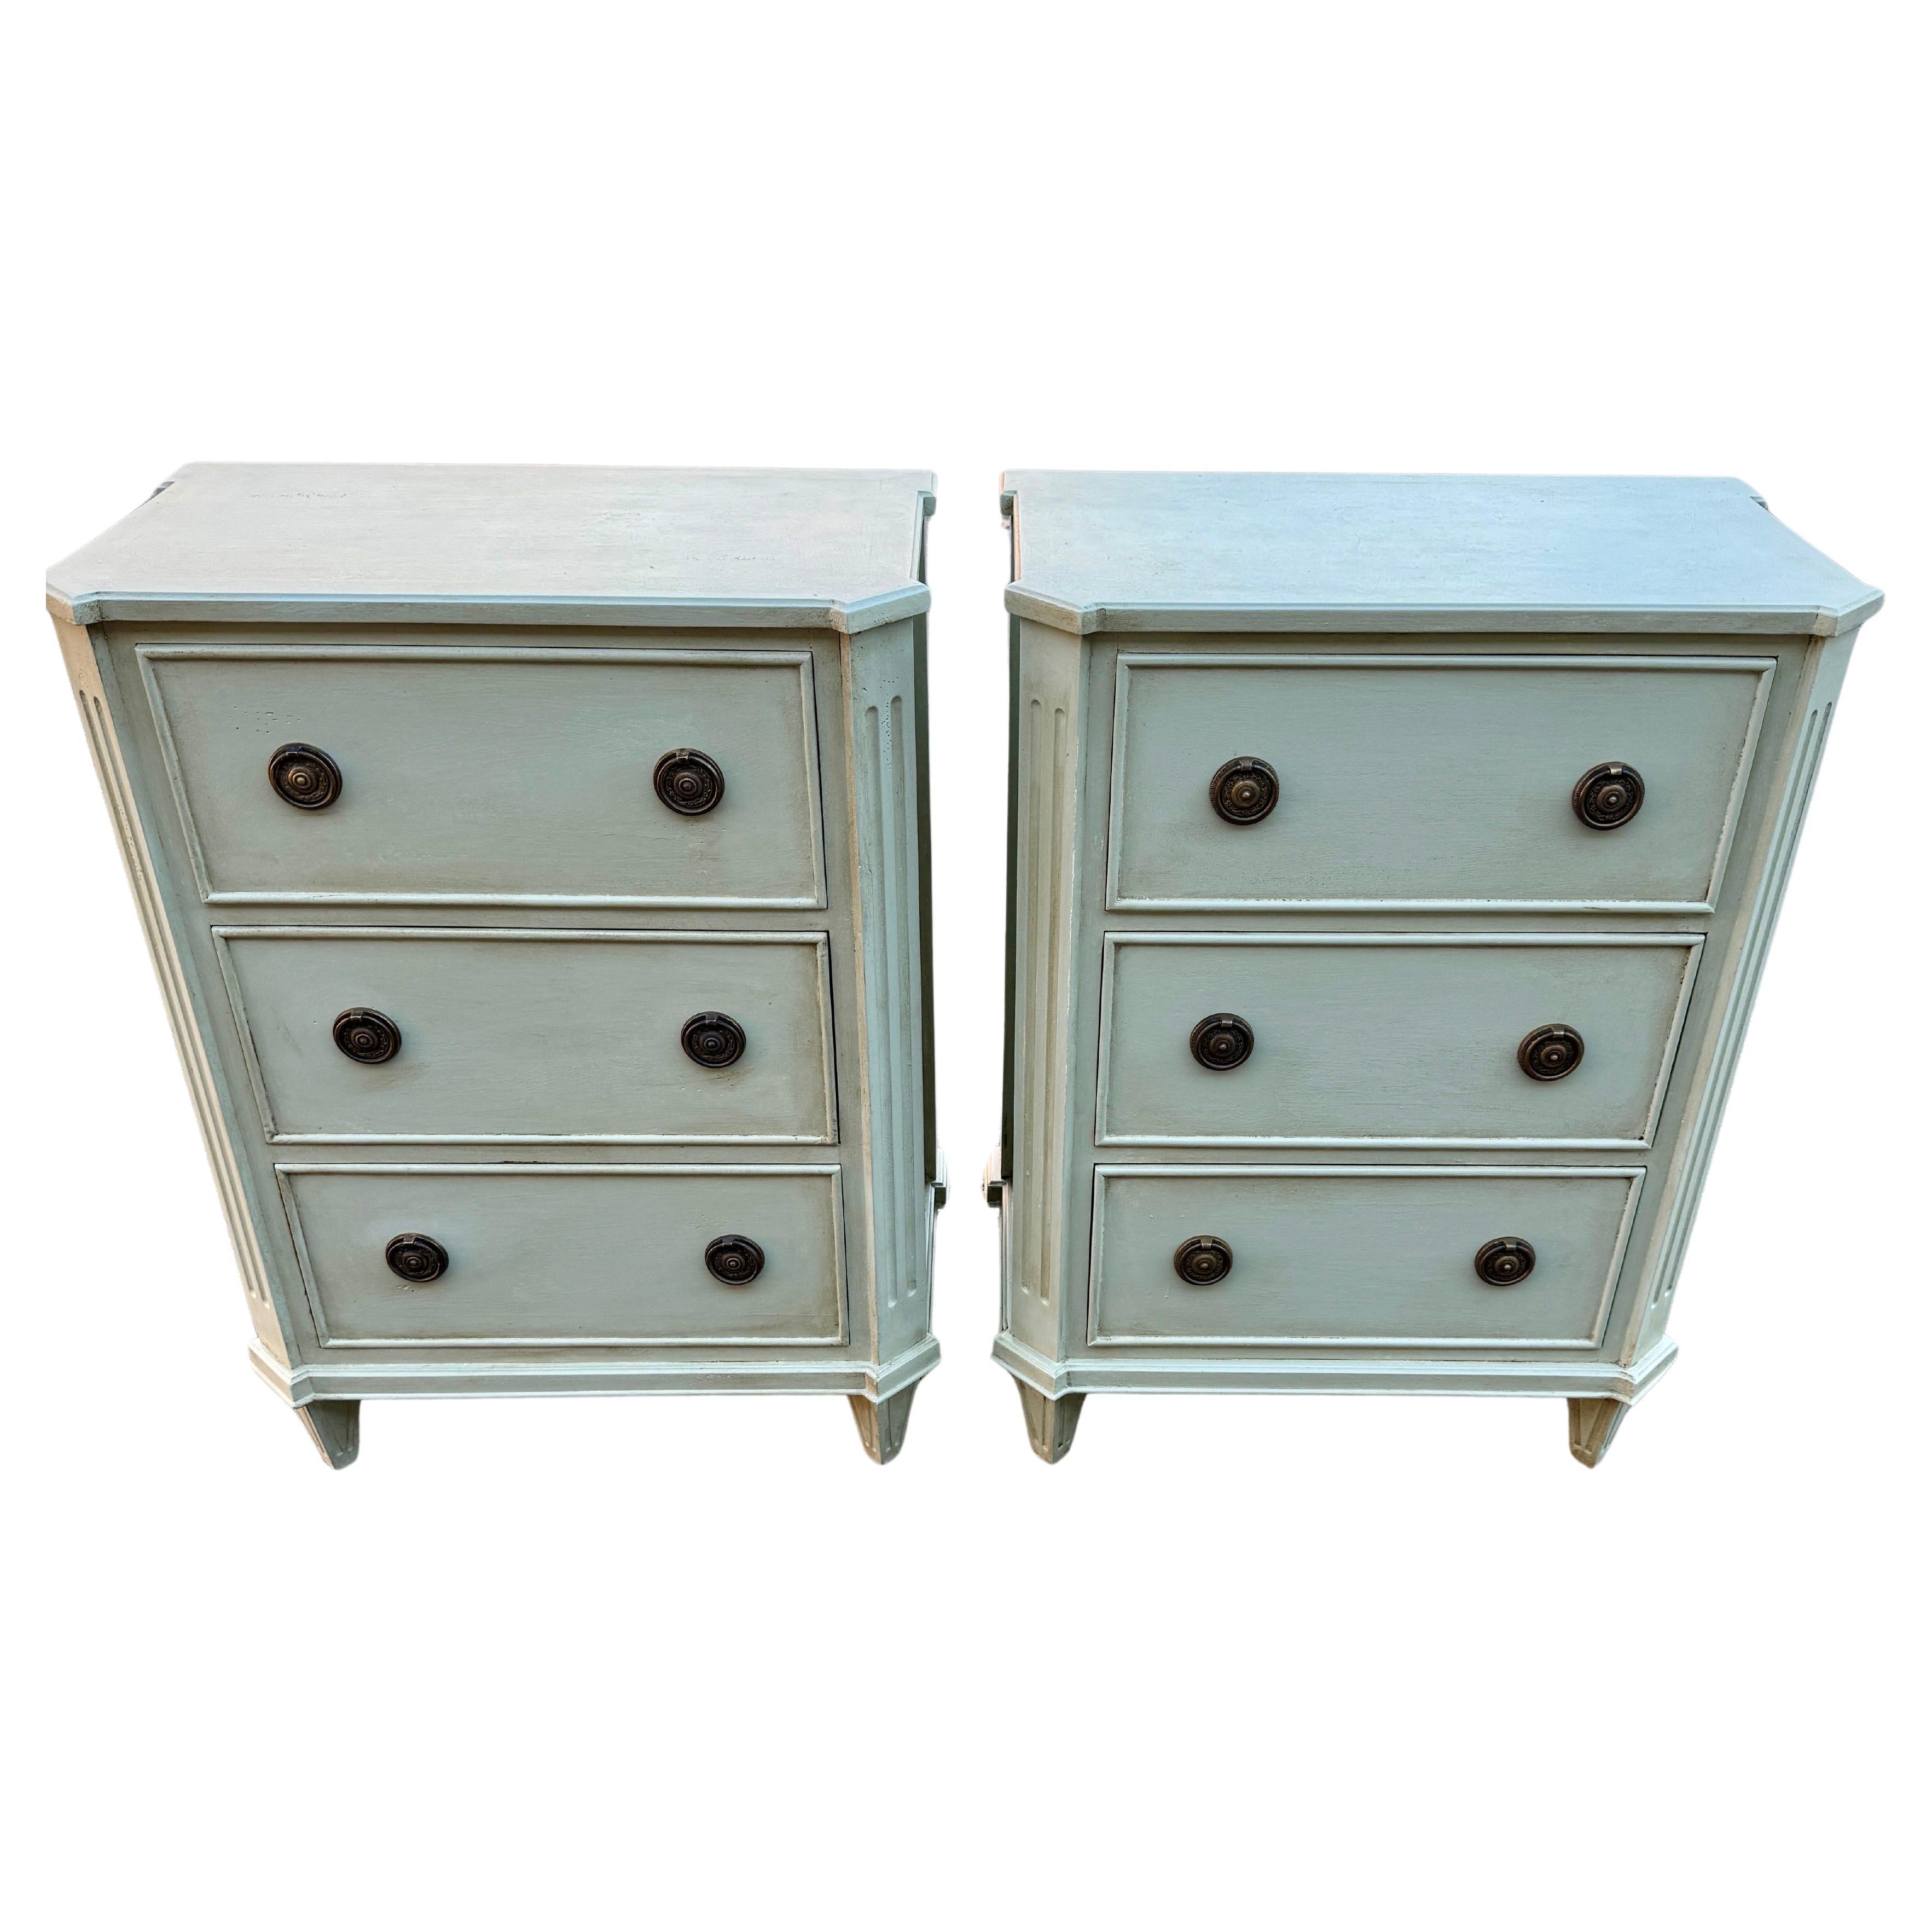 Pair Swedish Gustavian Style Painted 3 Drawer Chests Nightstands